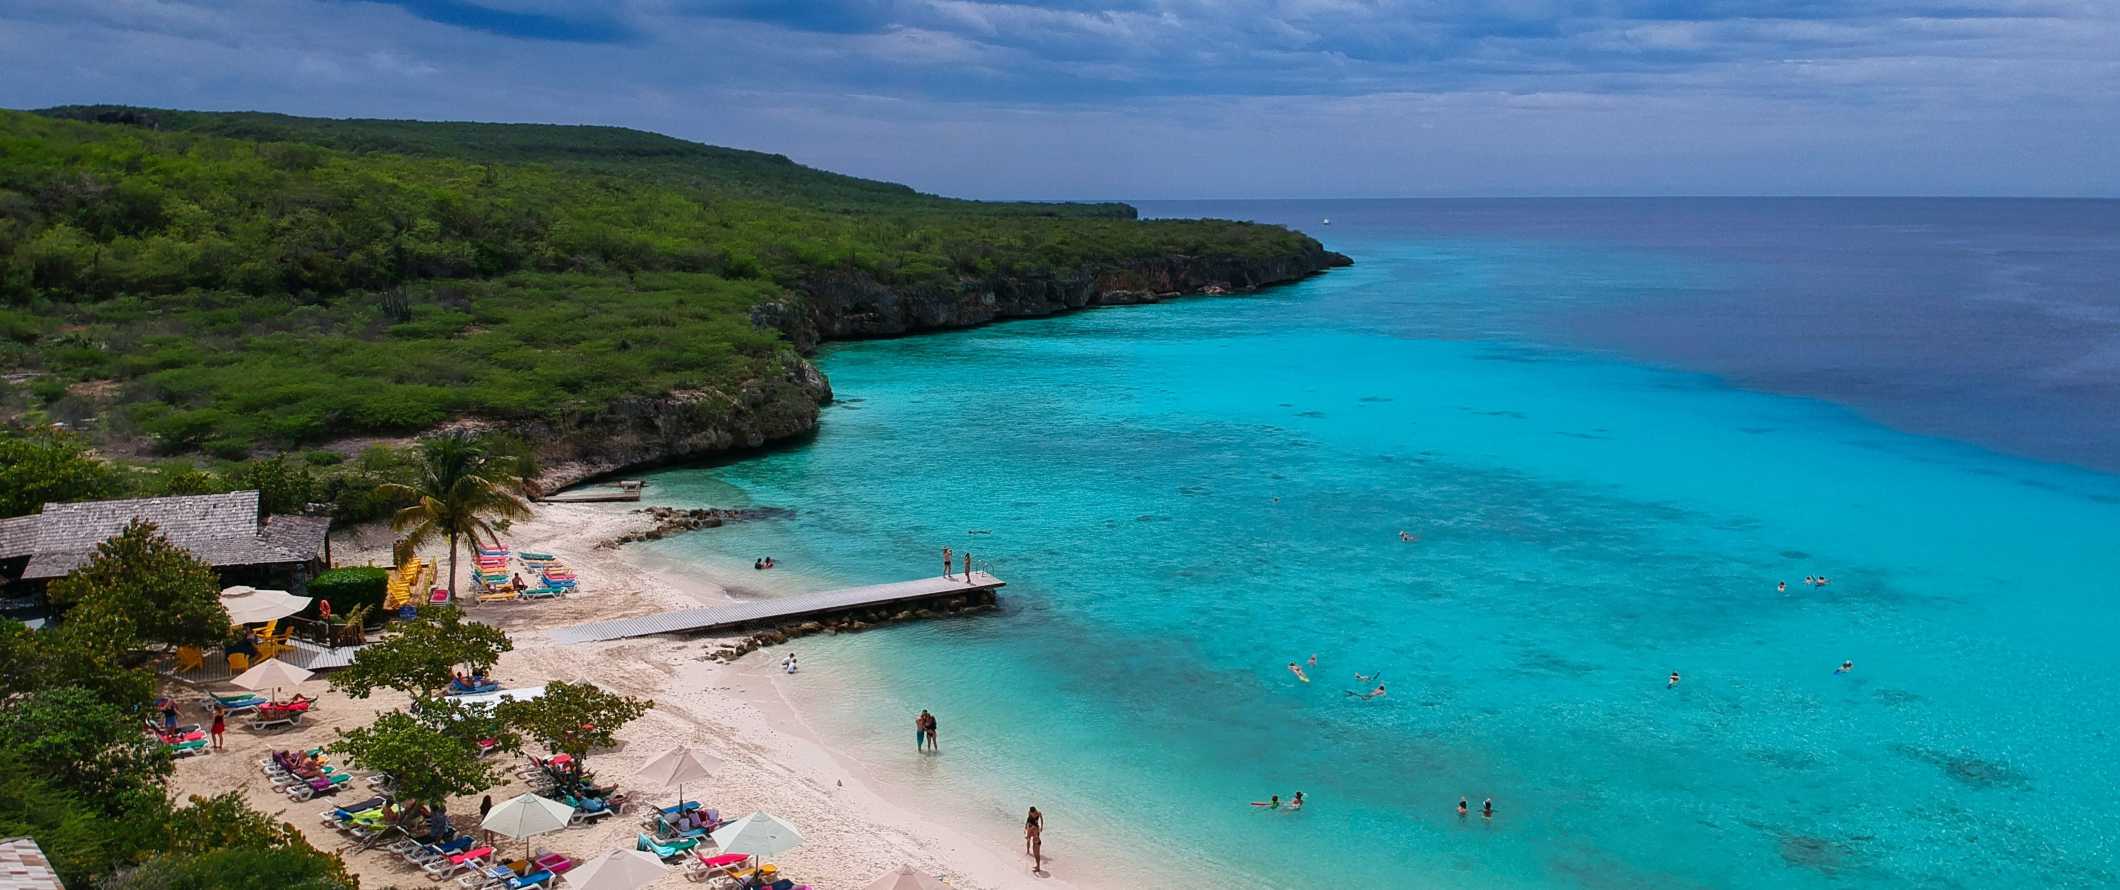 Drone view of a beach on the tropical island of Curaçao in the Caribbean